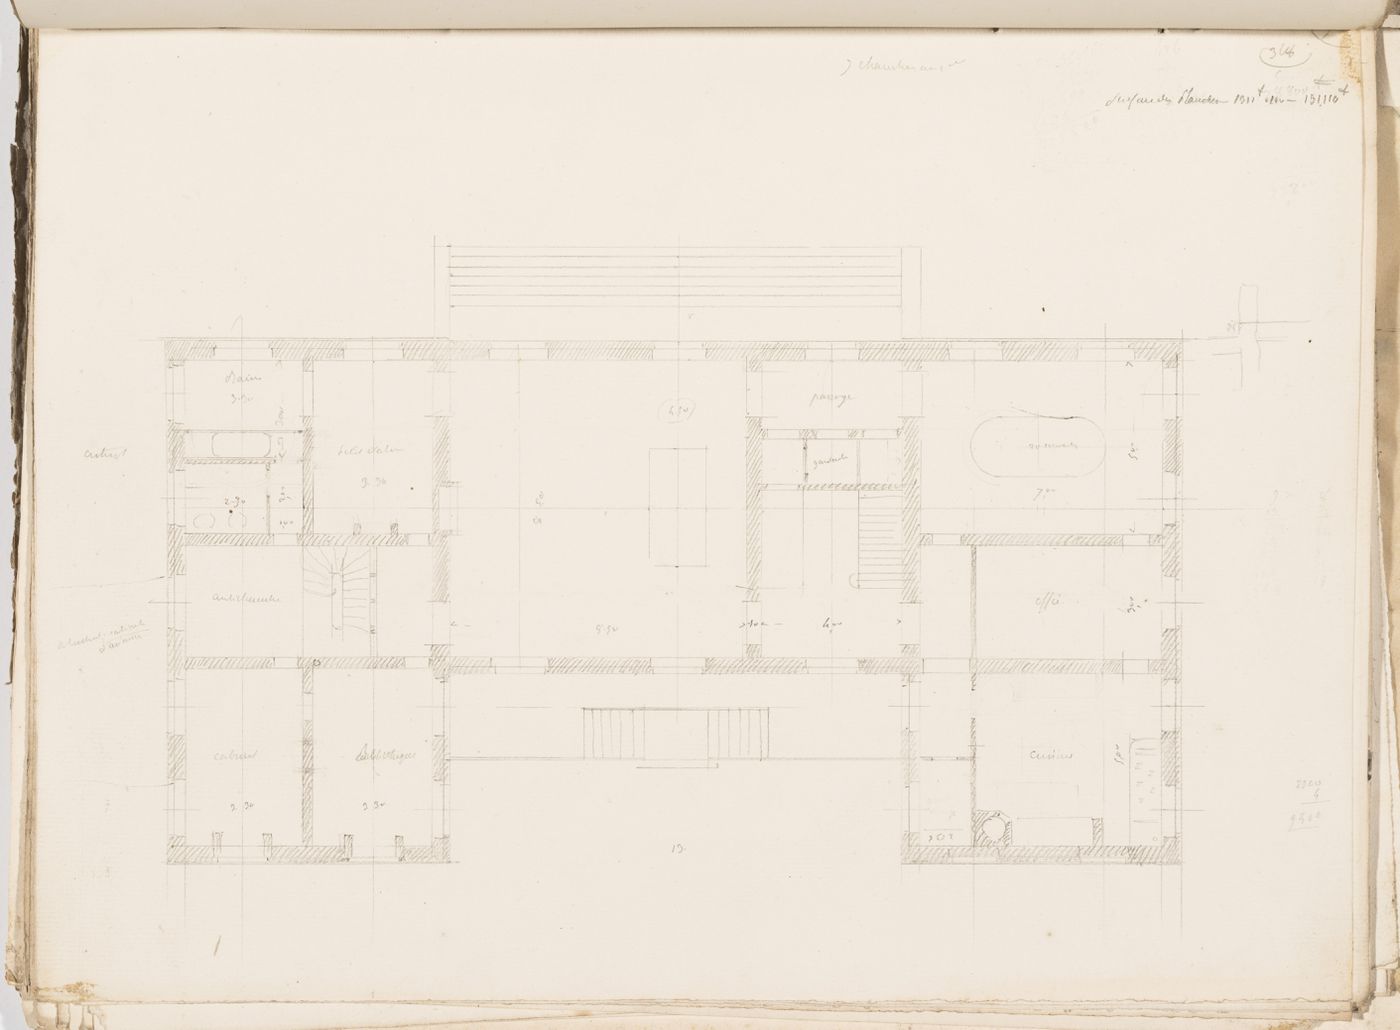 Project no. 5 for a country house for comte Treilhard: Ground floor plan